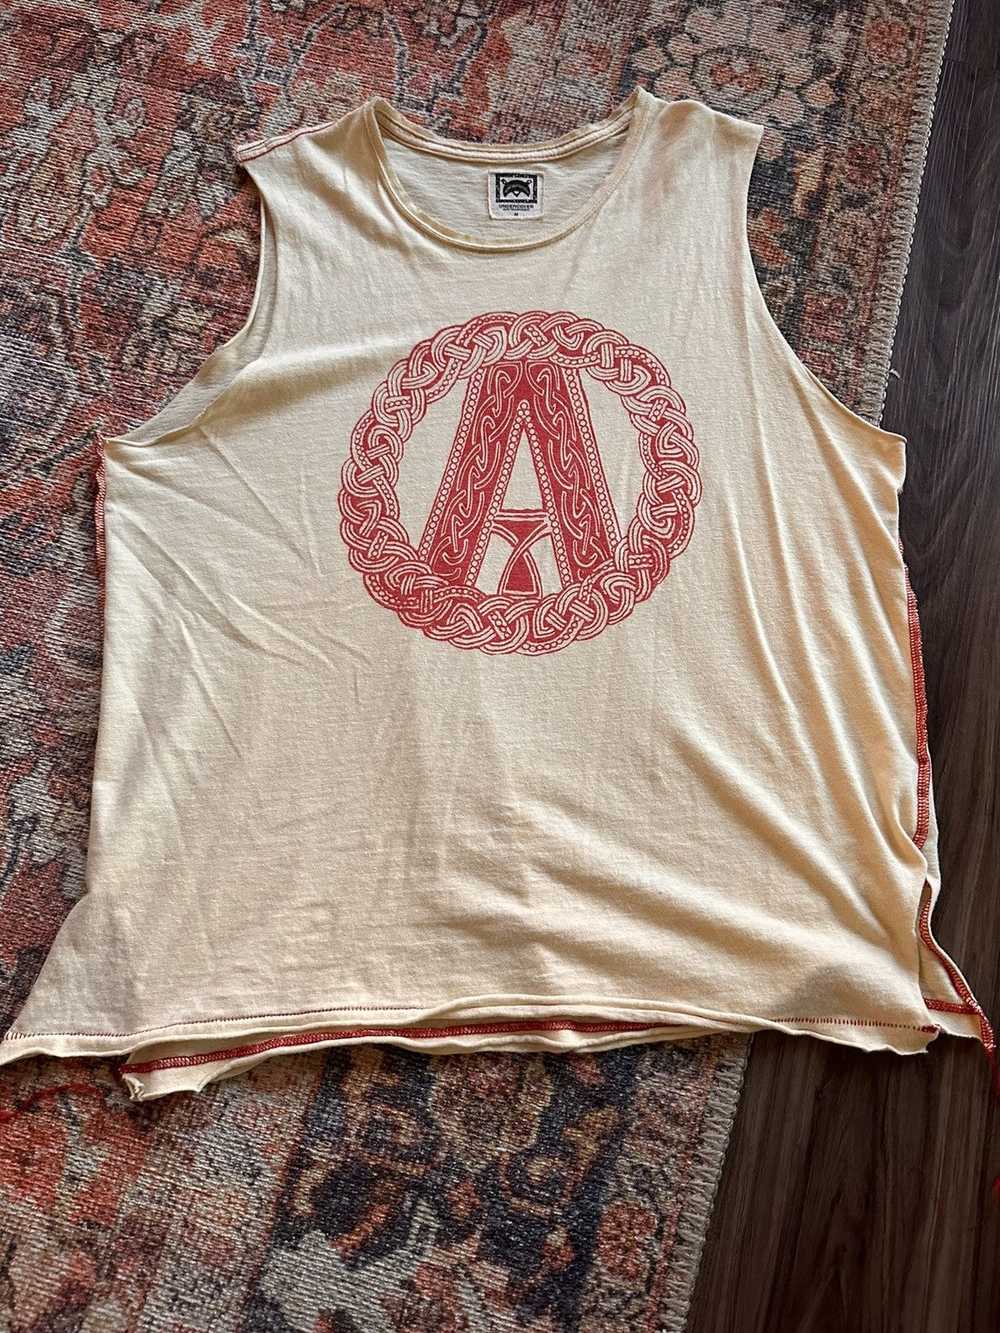 Undercover Undercover 2003 scab anarchy tank top - image 1